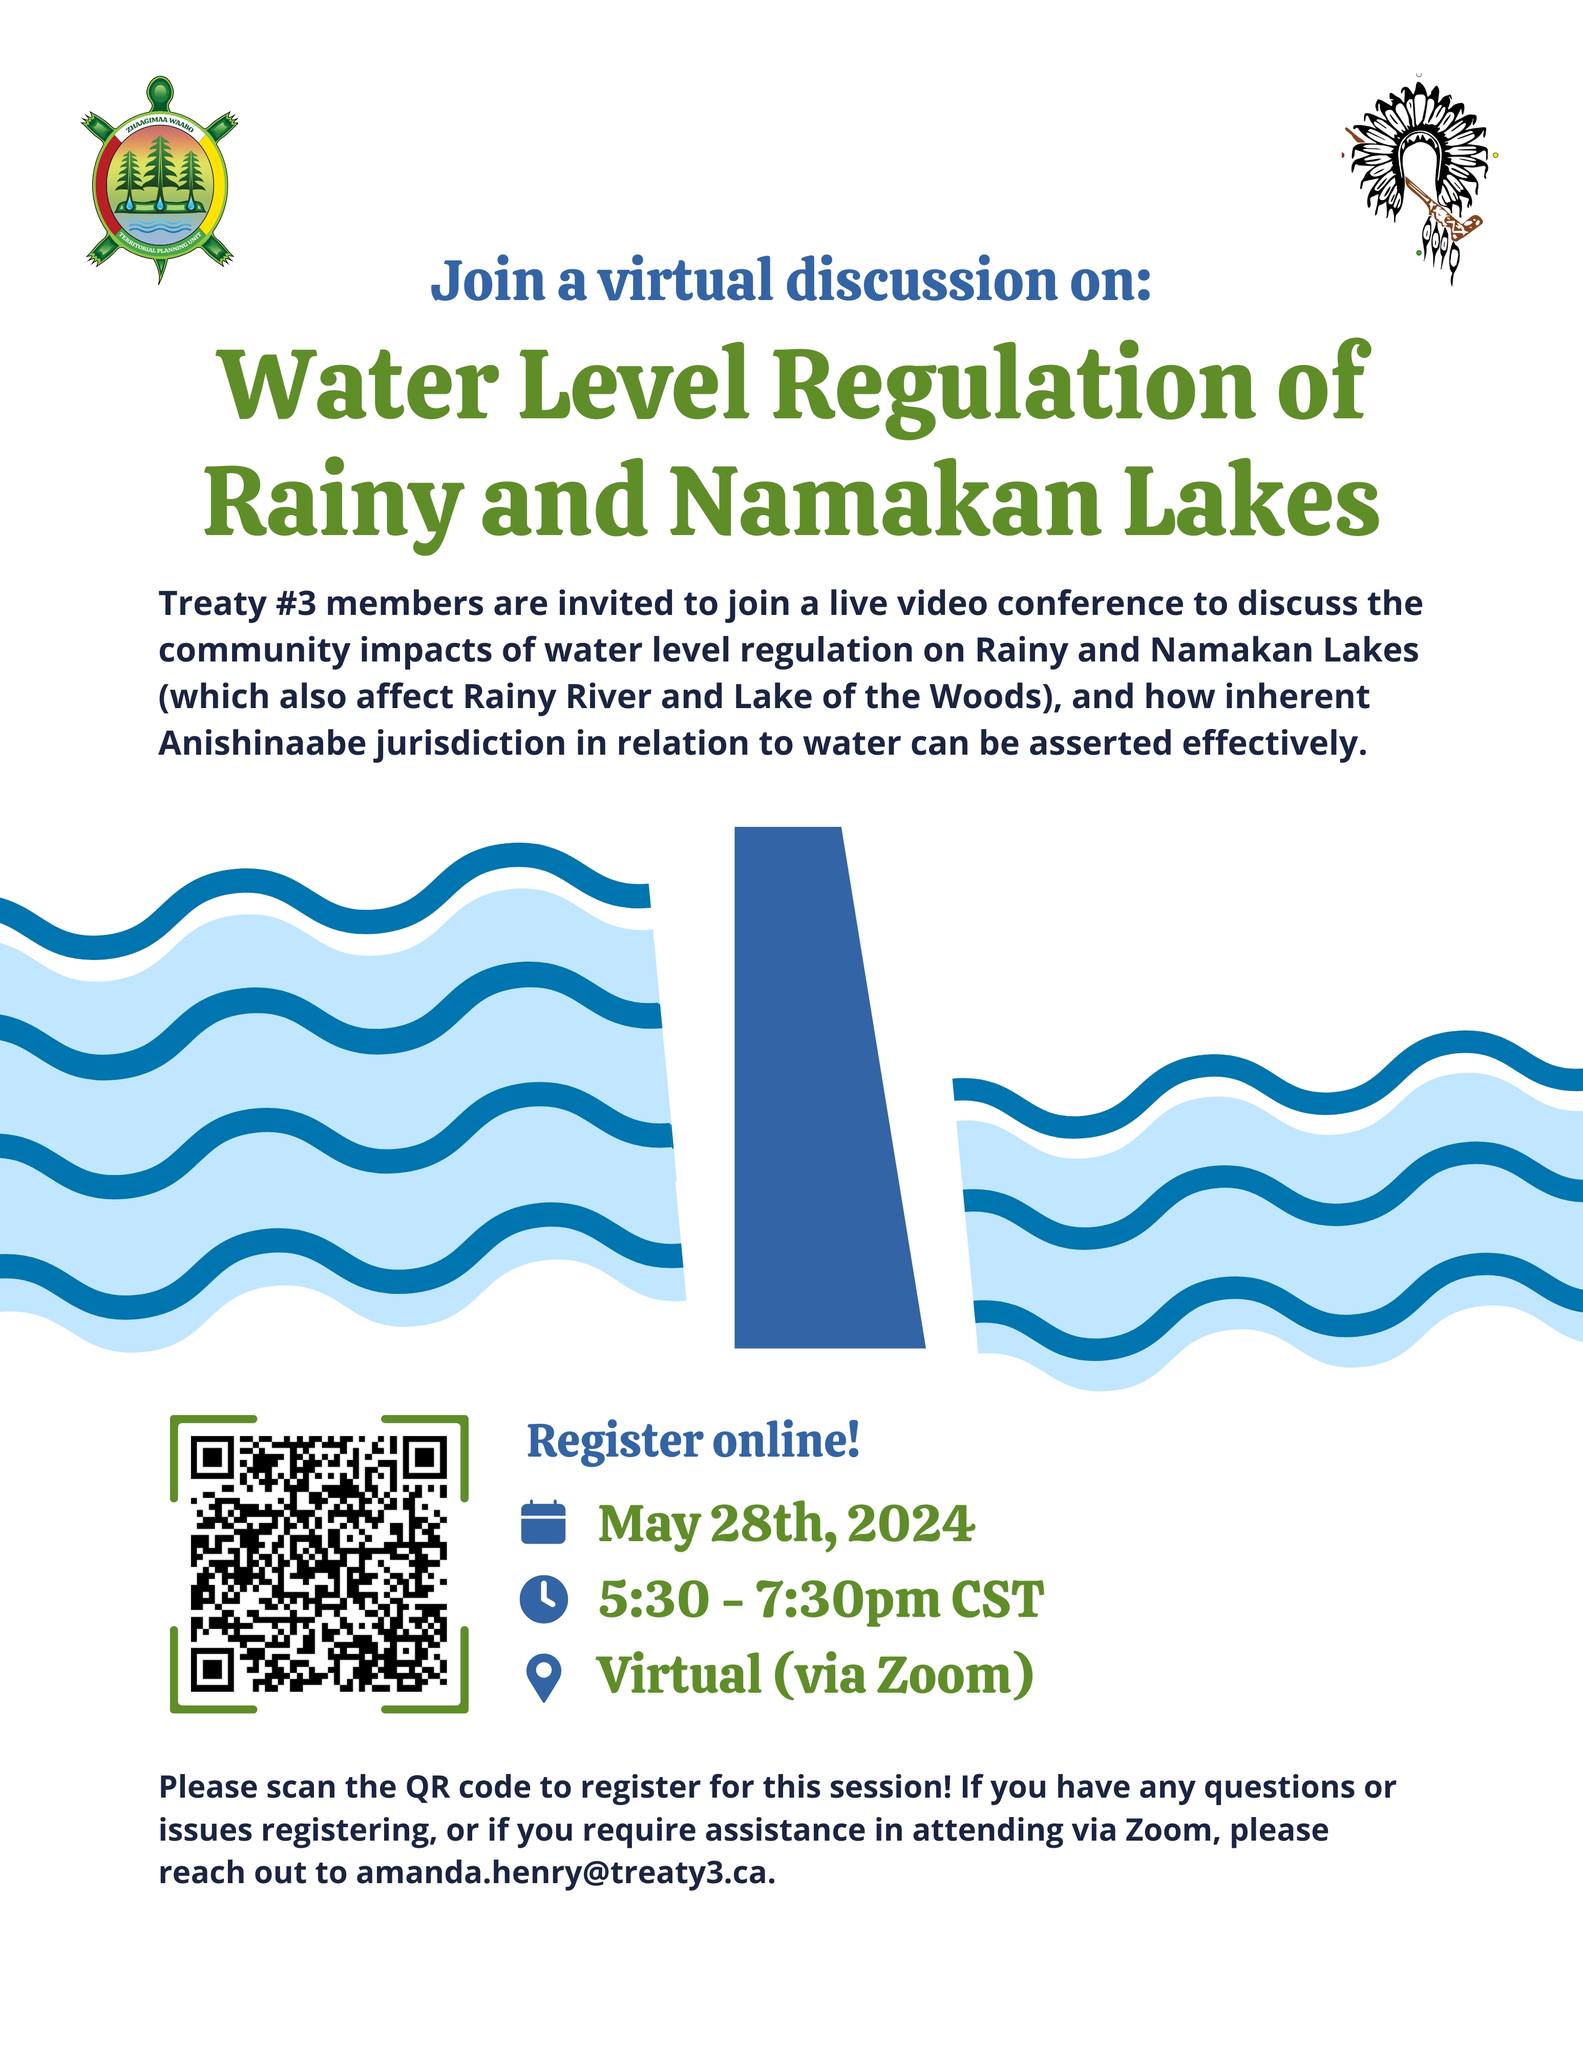 Water Level Regulation of Rainy and Namakan Lakes Virtual Discussion